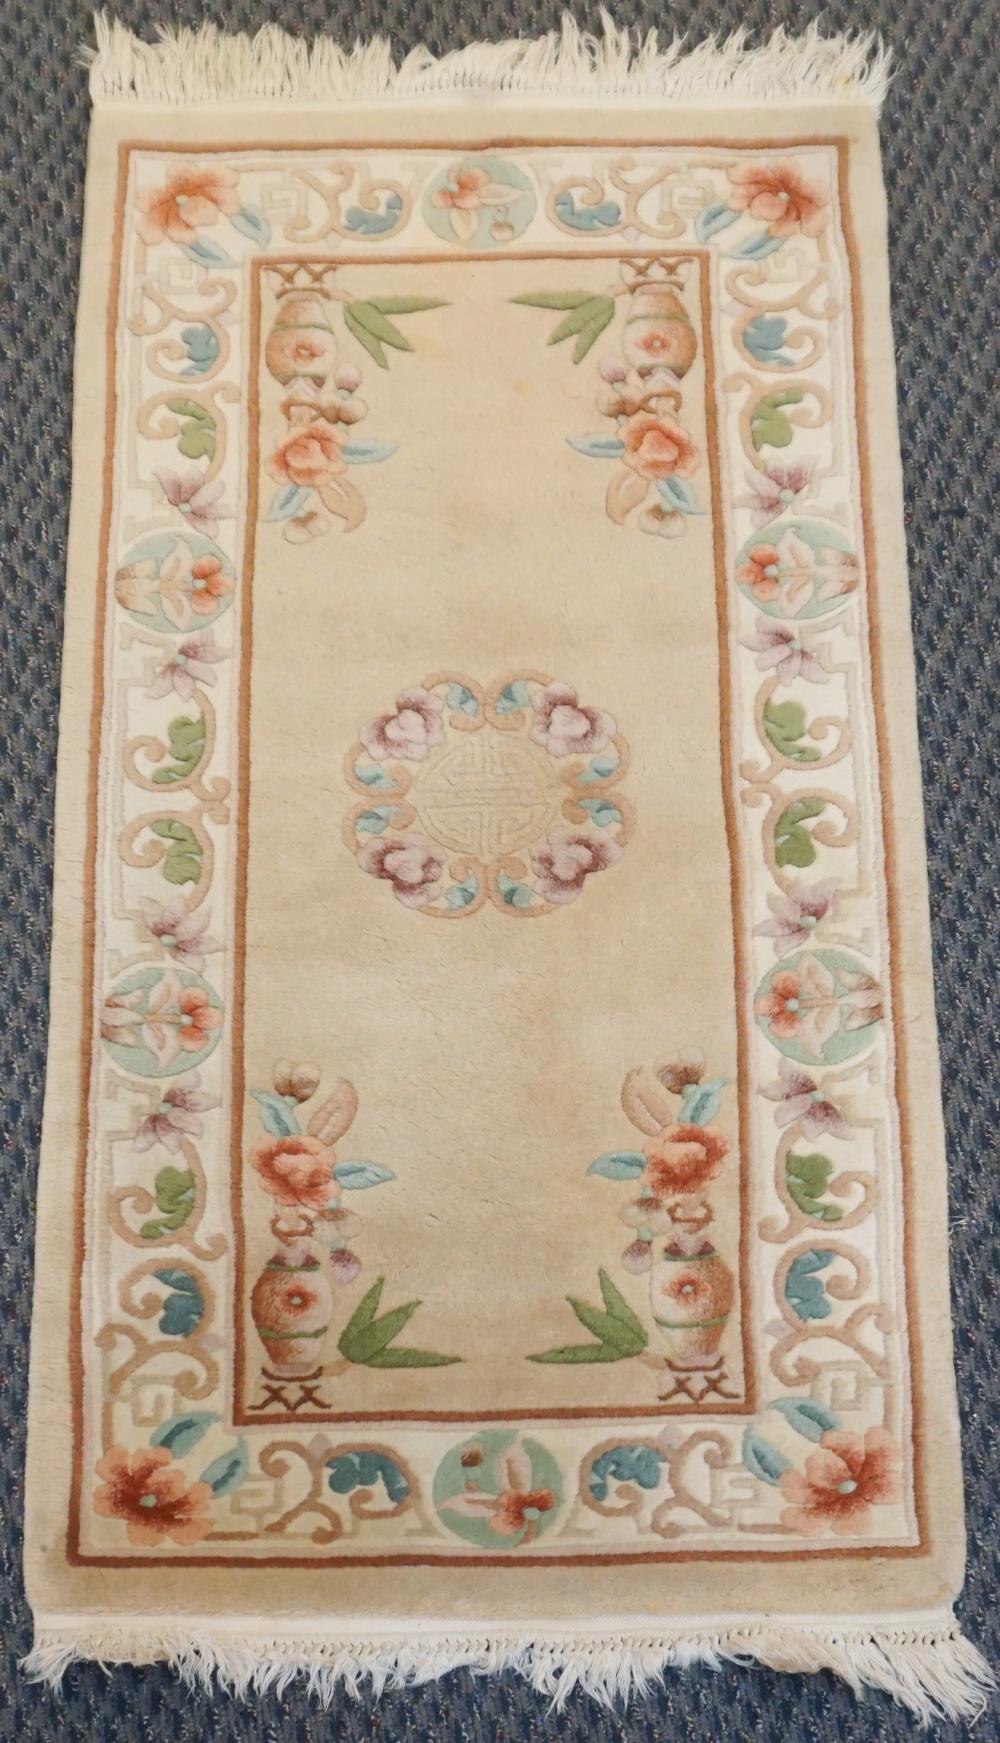 TWO CHINESE RUGS 4 FT 8 IN X 2 32eaba